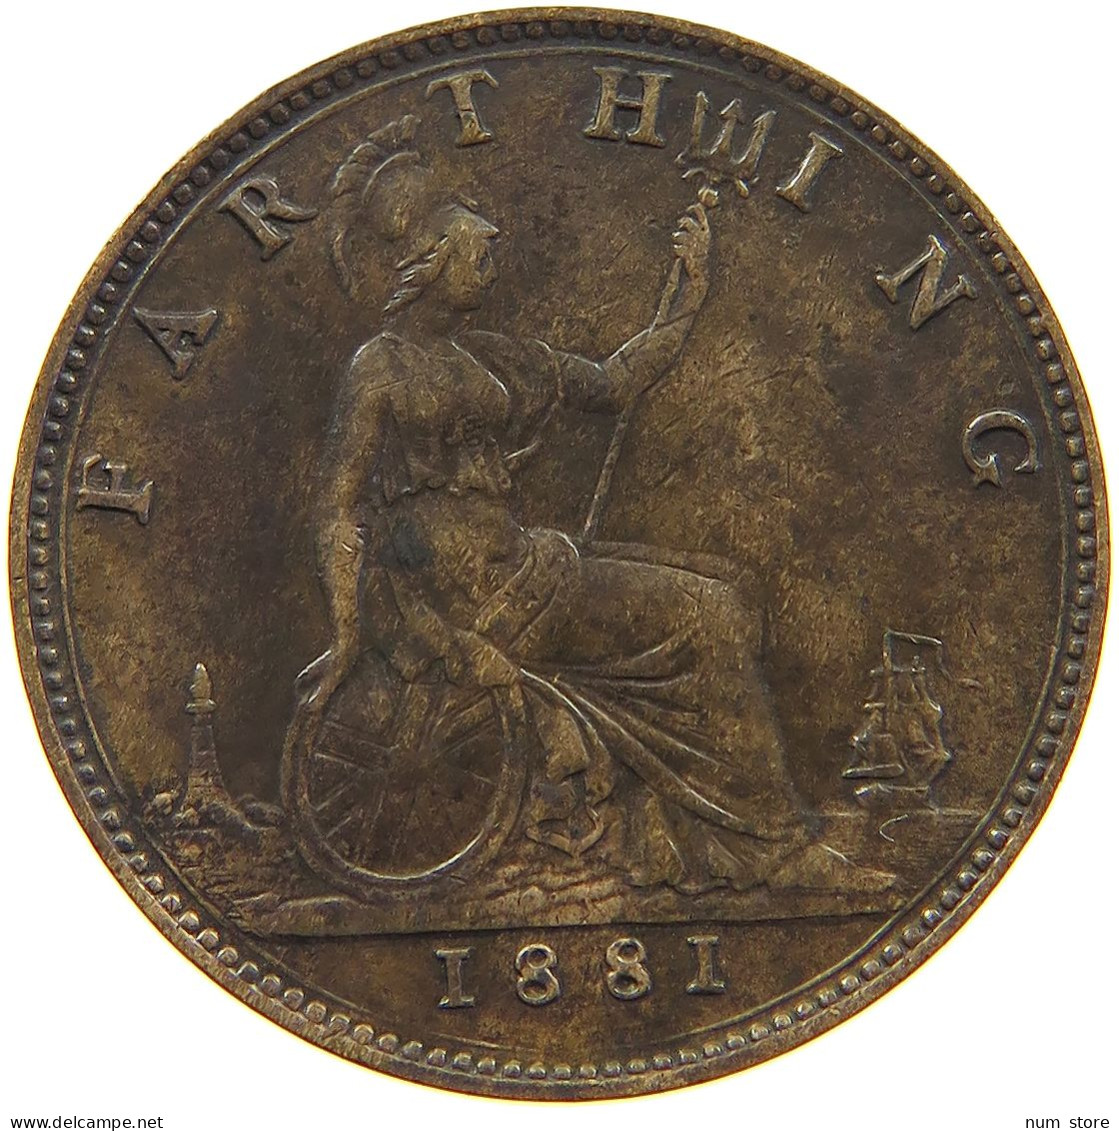 GREAT BRITAIN FARTHING 1881 Victoria 1837-1901 #a058 0123 - B. 1 Farthing